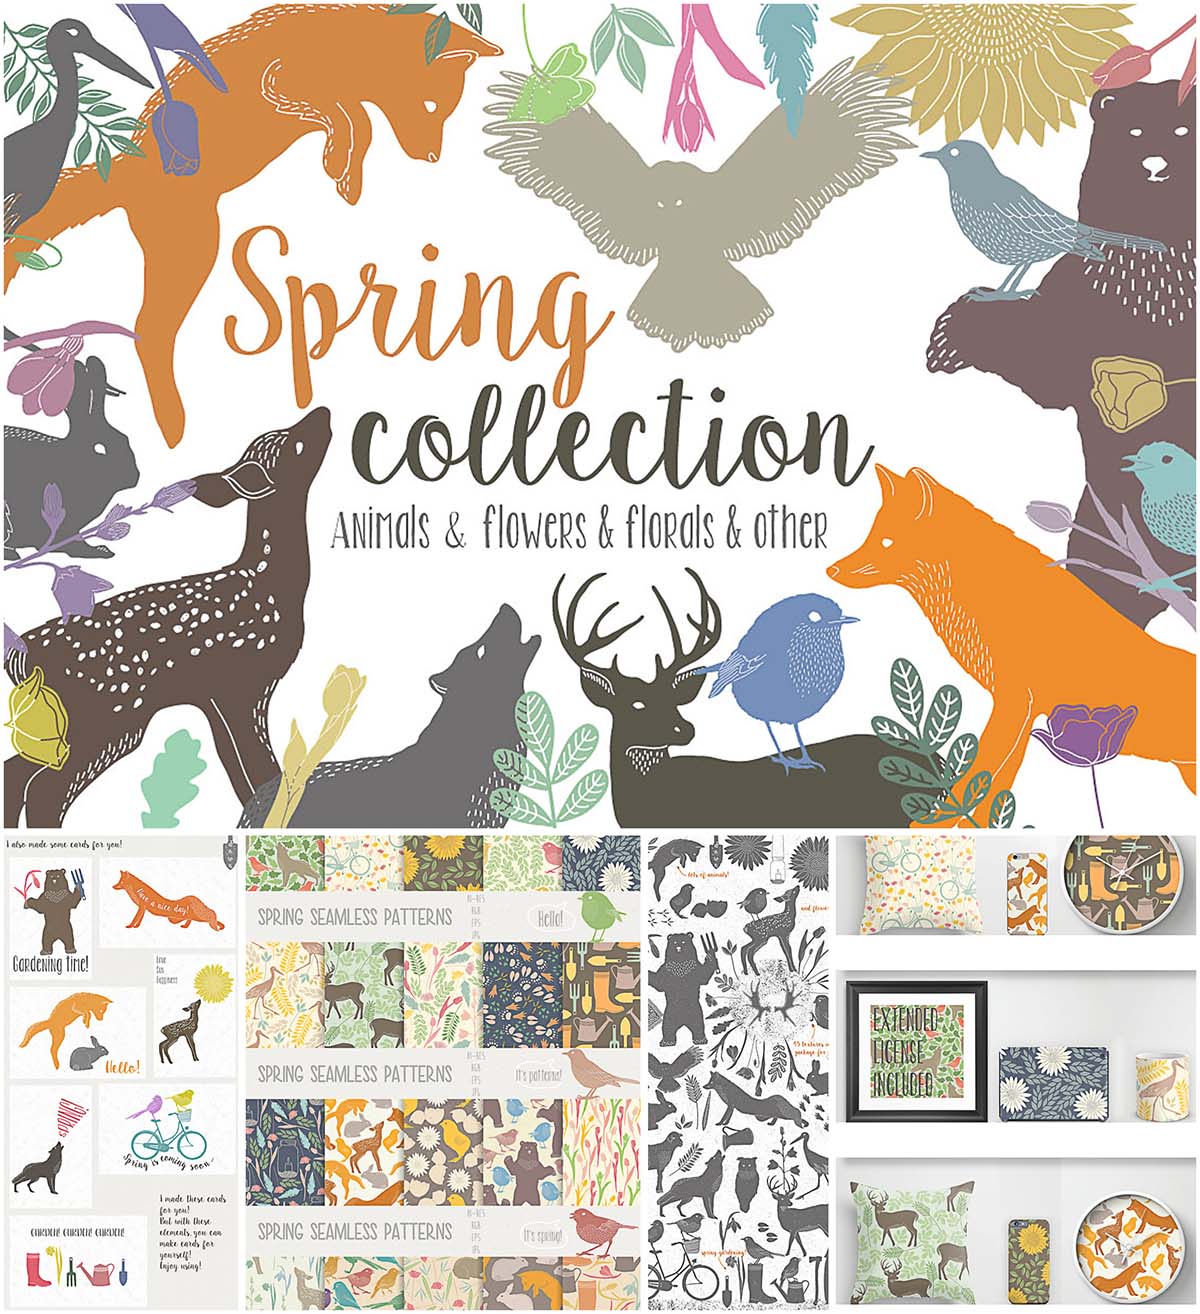 Lovely spring illustration collection